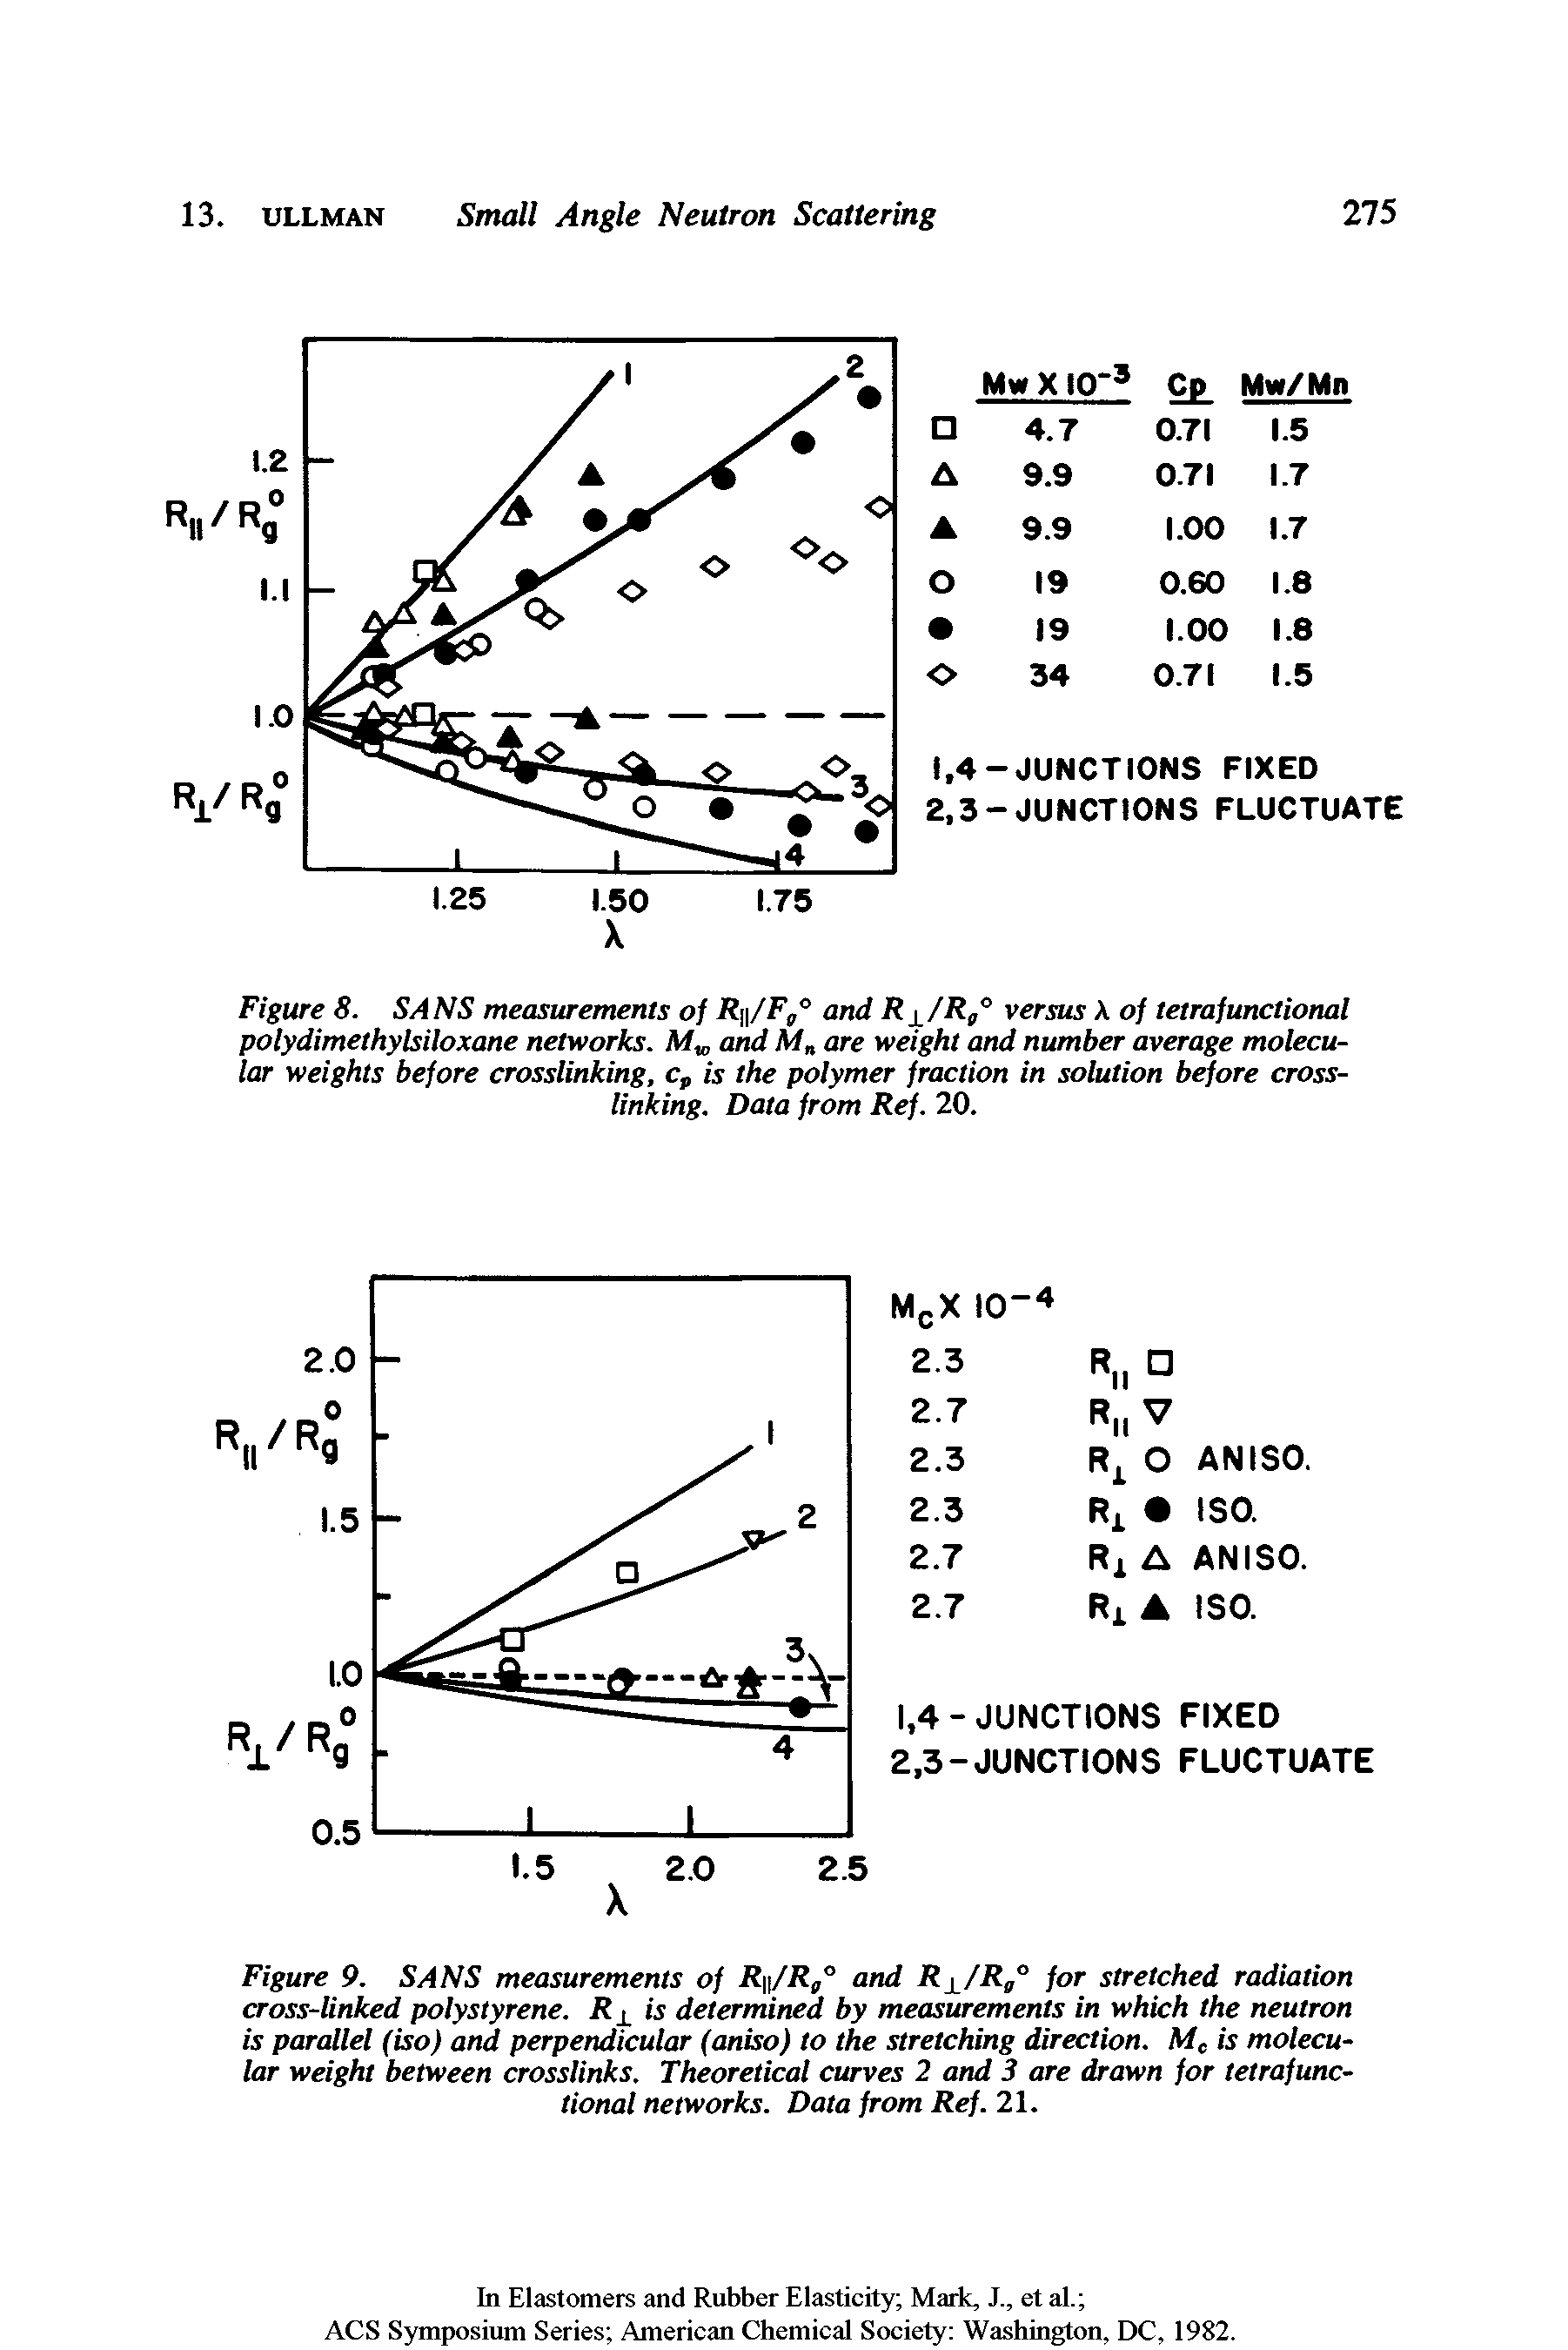 Figure 8. SANS measurements of R /Fg° and R /Rg° versus A of tetrafunctional polydimethylsiloxane networks. Mw and Mn are weight and number average molecular weights before crosslinking, cp is the polymer fraction in solution before cross-linking. Data from Ref. 20.